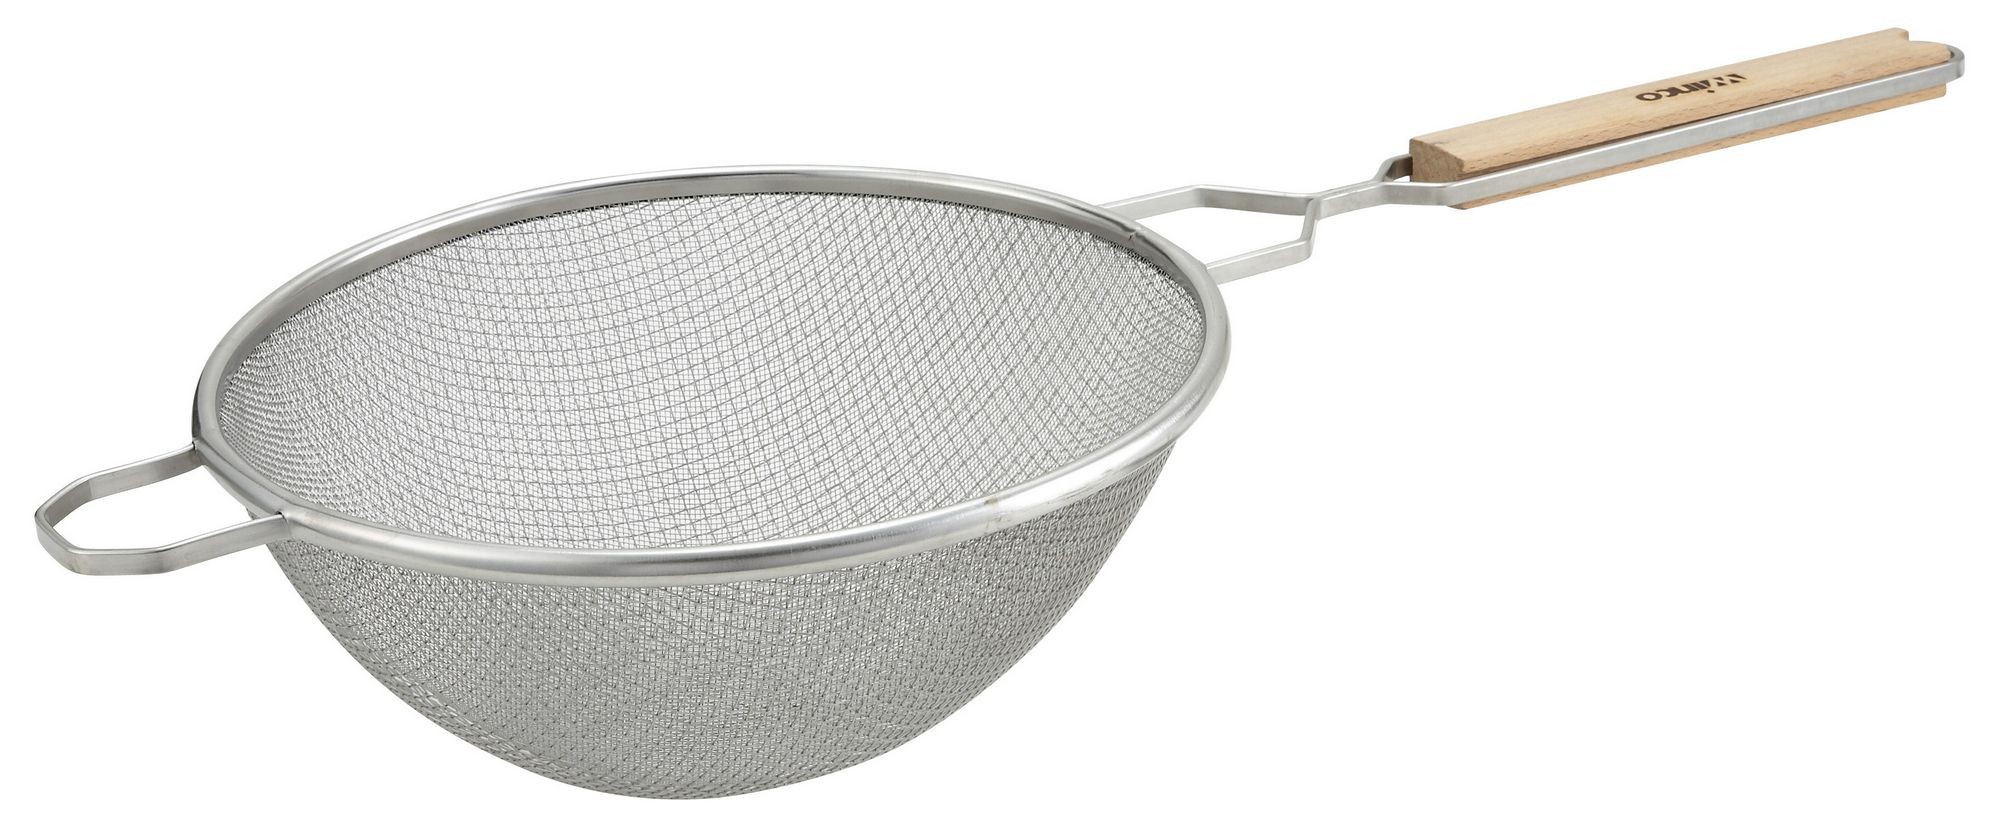 Designed for Chefs and Kitchen 9 Inch Fine Mesh Strainer with 9 Inch Large Stainless Steel Double Fine Mesh and Reinforced Frame and Comfortable Wooden Handle Grip